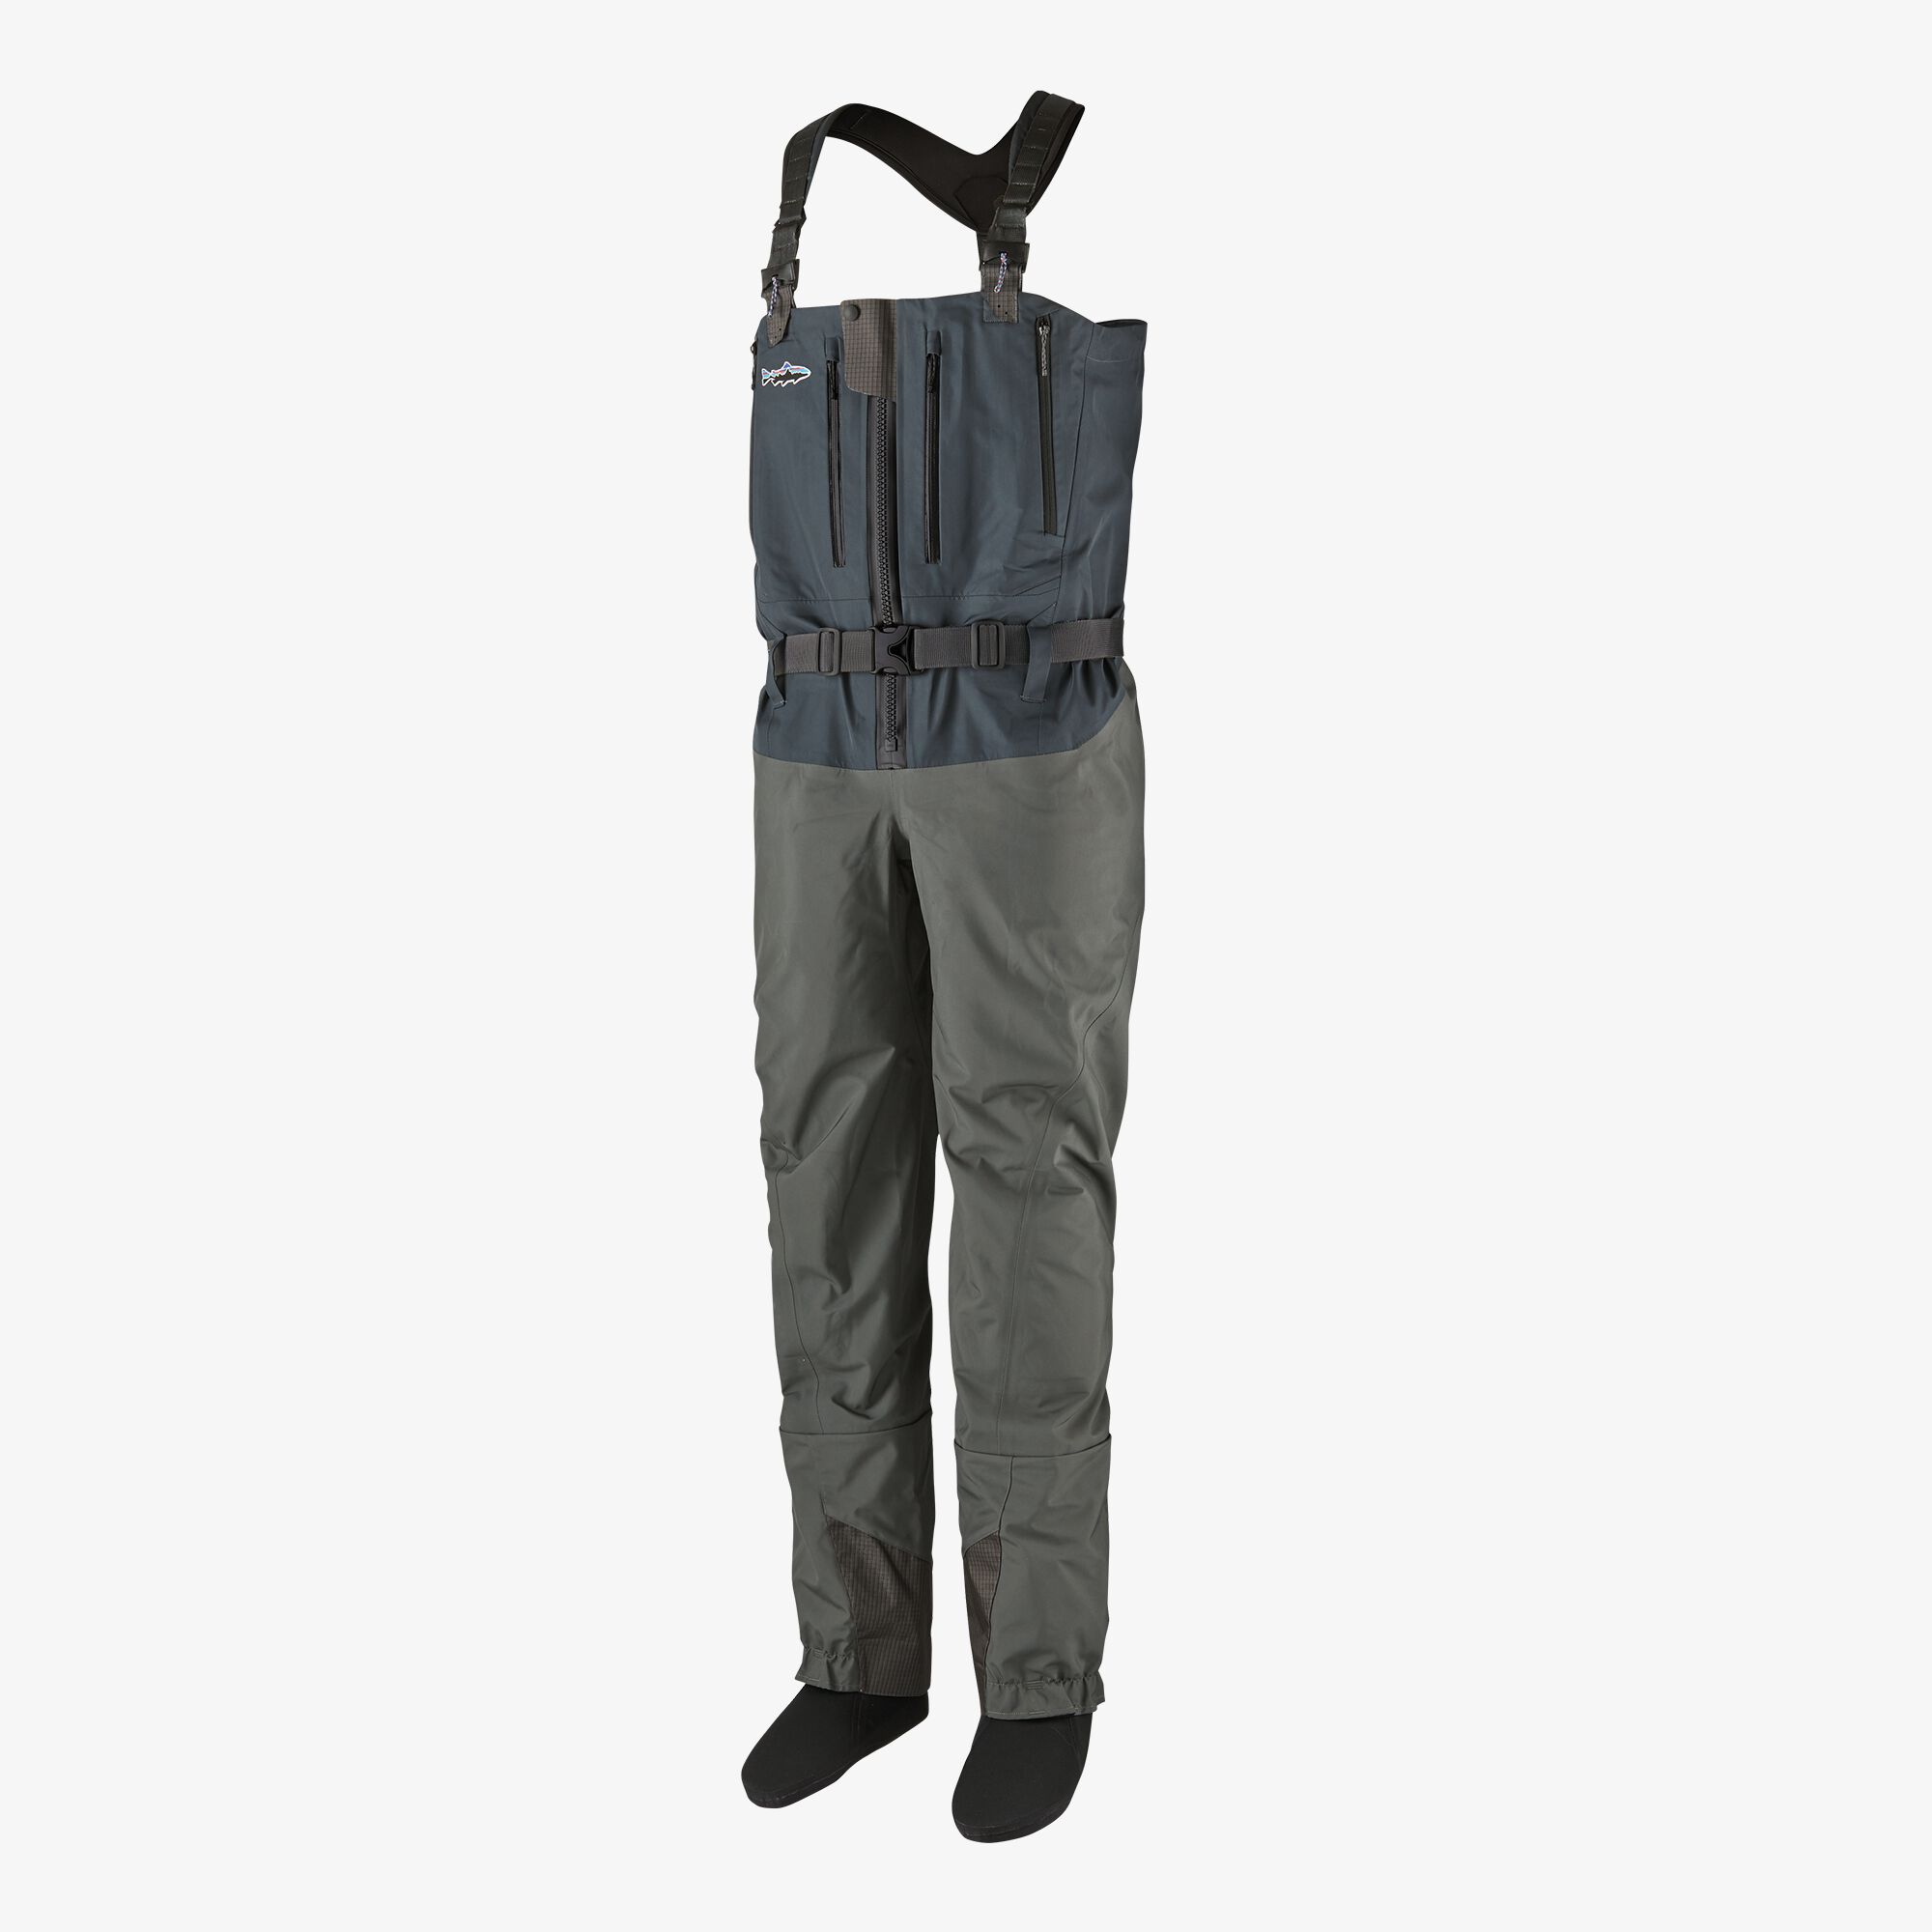 PATAGONIA SWIFTCURRENT EXPEDITION ZIP-FRONT WADER - FORGE GREY - MRM